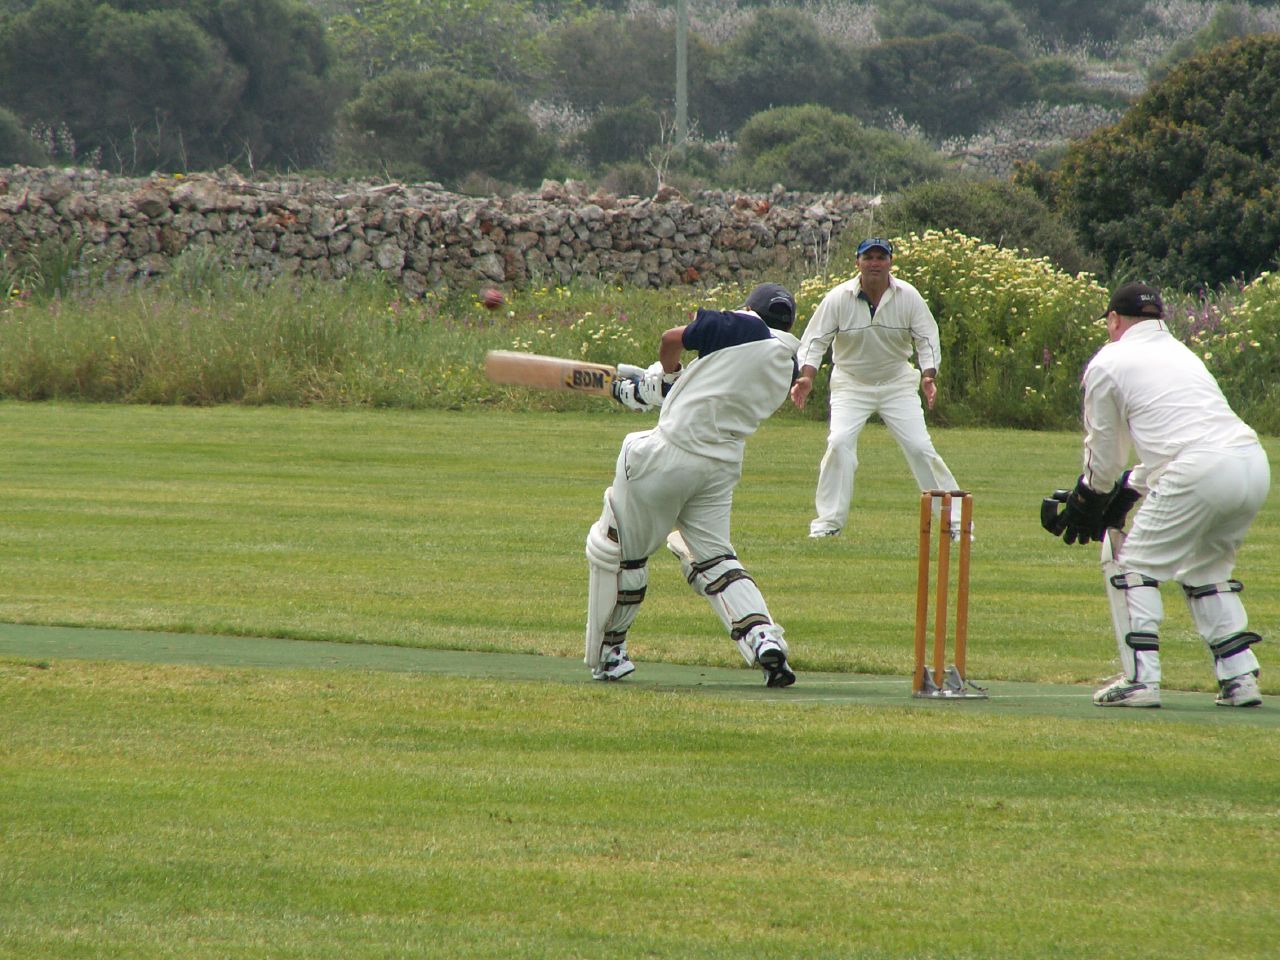 three men in white suits playing cricket on grass